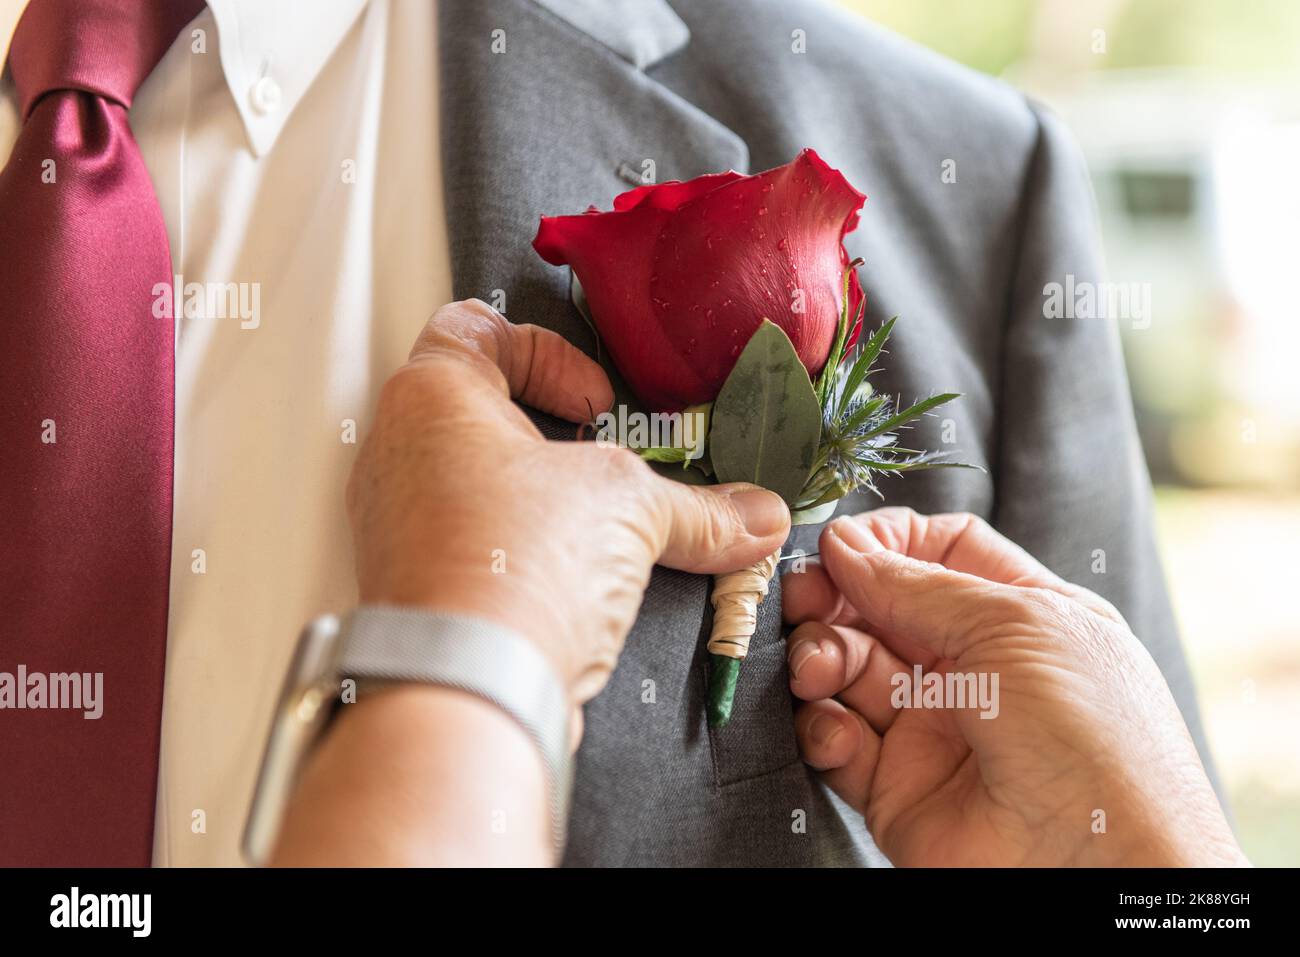 Hands helping pin the boutonniere onto the lapel of his suit jacket by pushing with the thumbs. Stock Photo